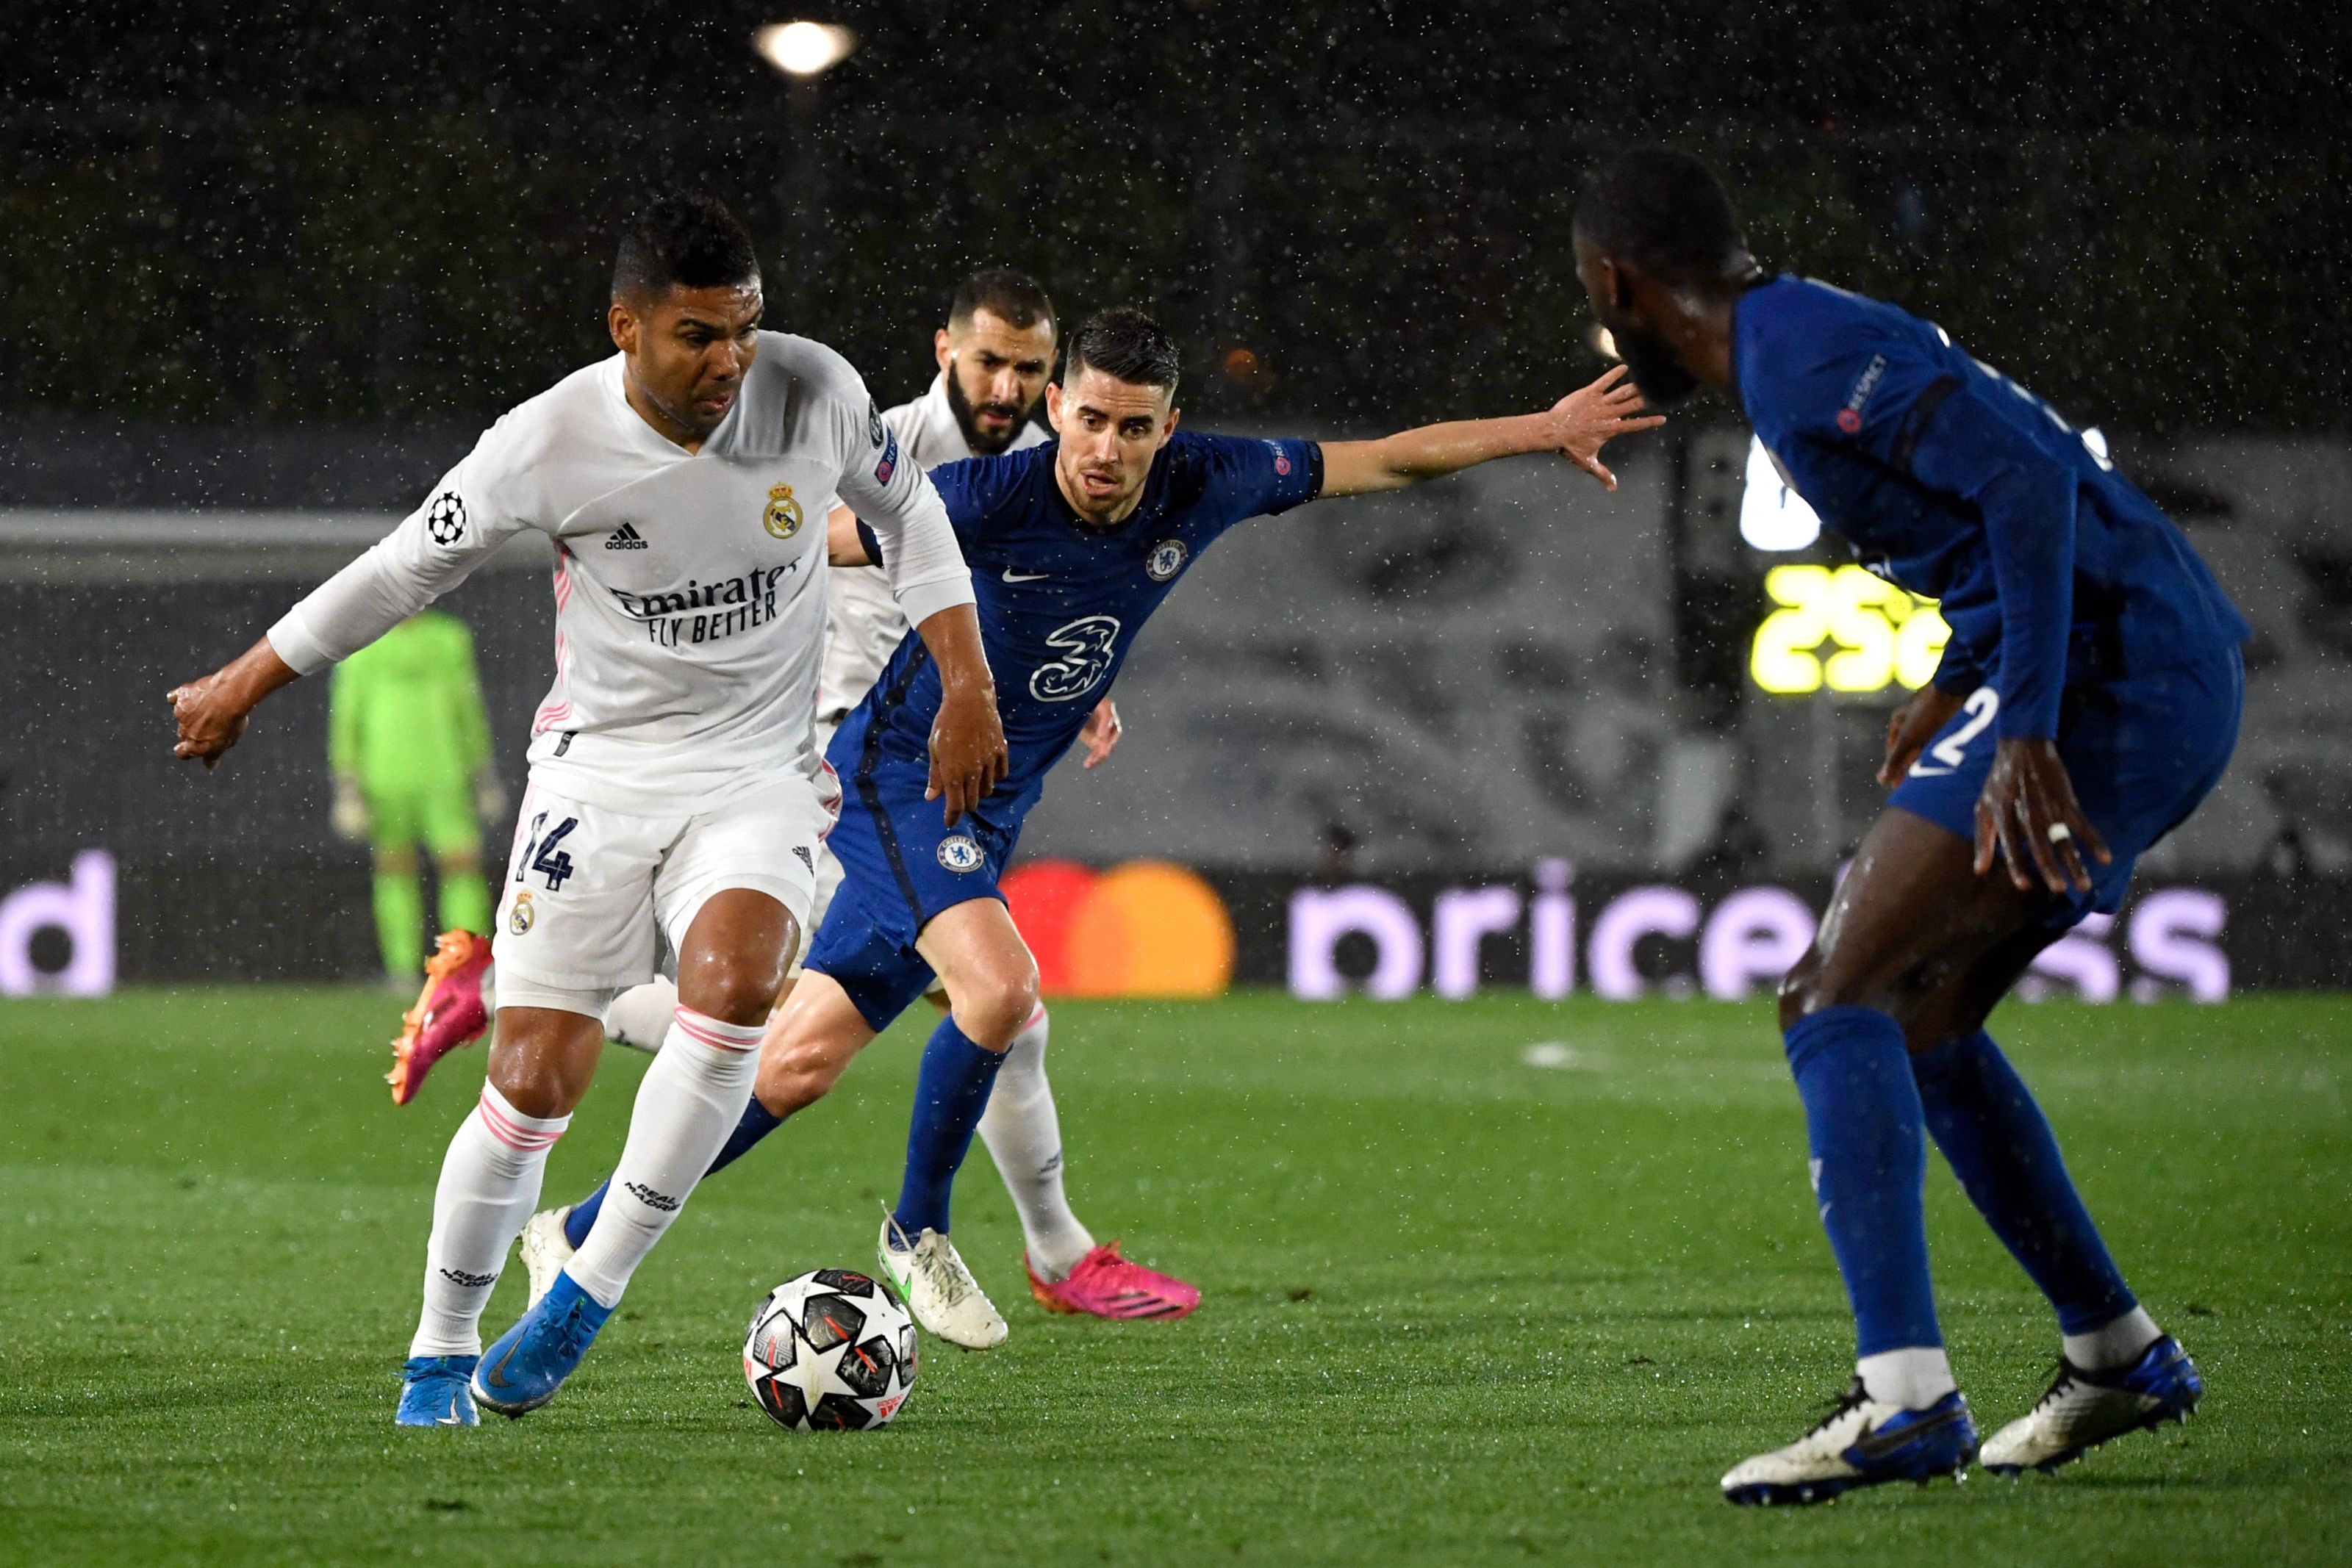 Three things to look for in Chelsea vs Real Madrid UCL semifinal